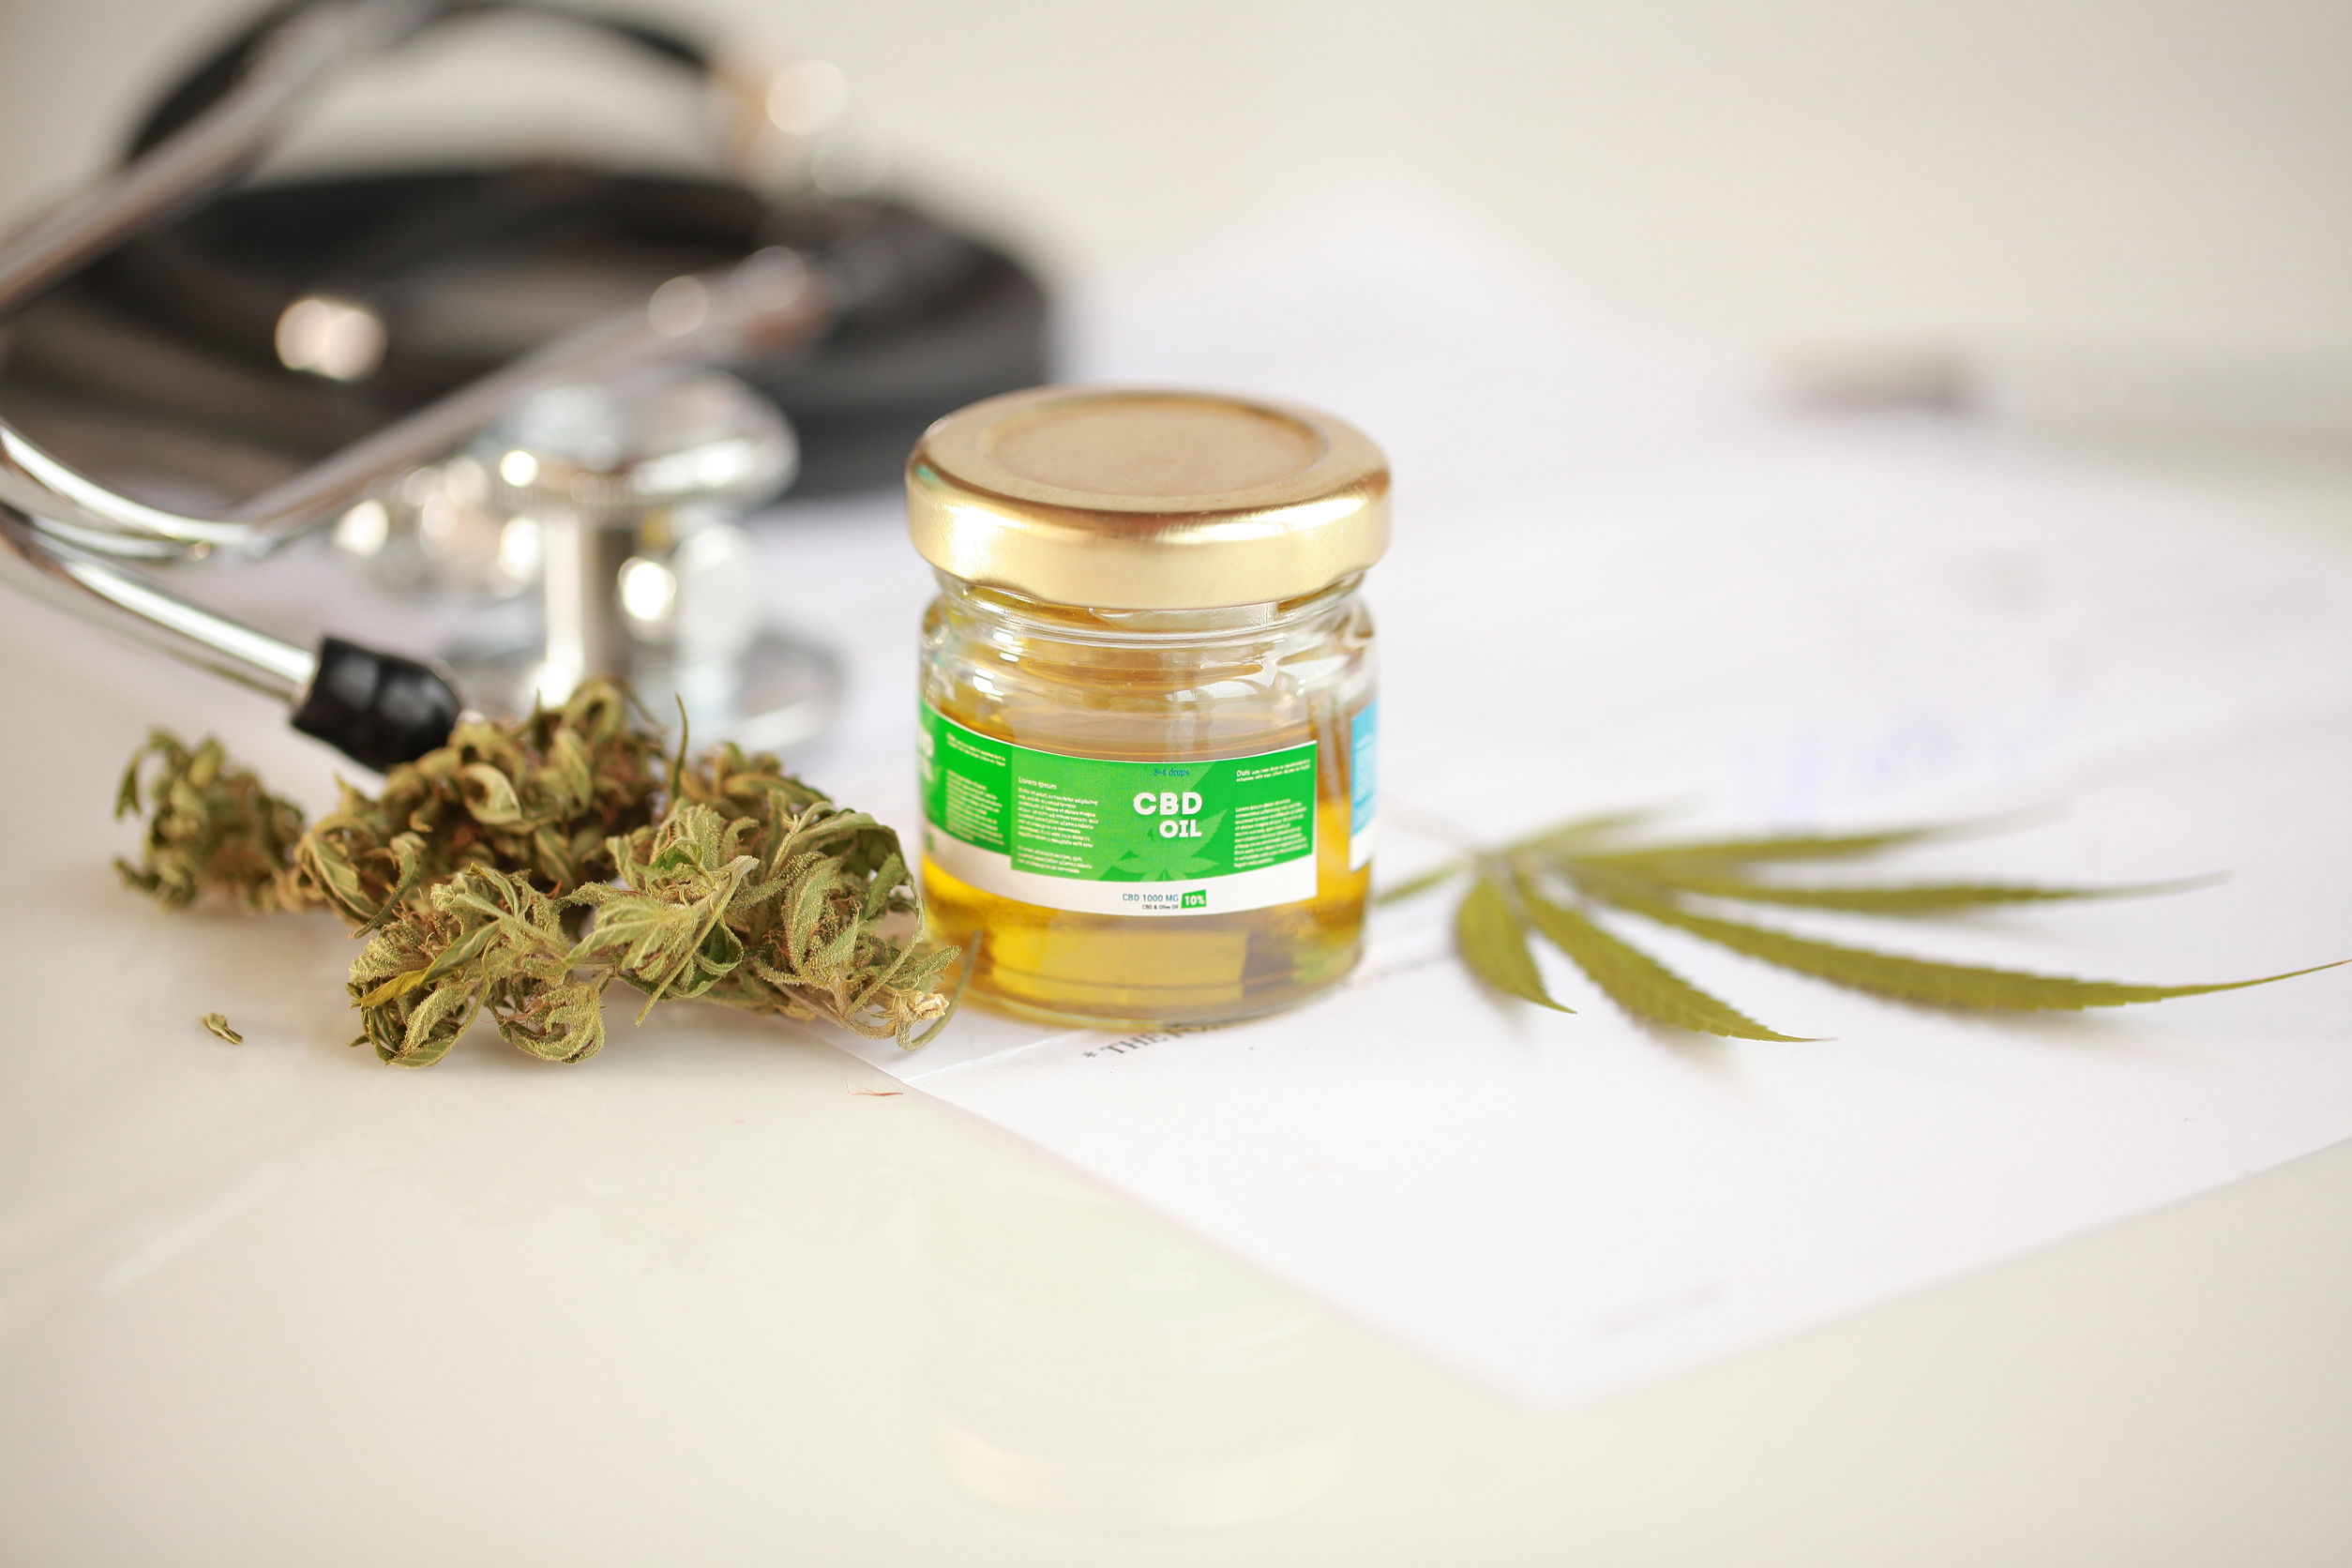 List of Conditions that Qualify for Medical Marijuana in Florida